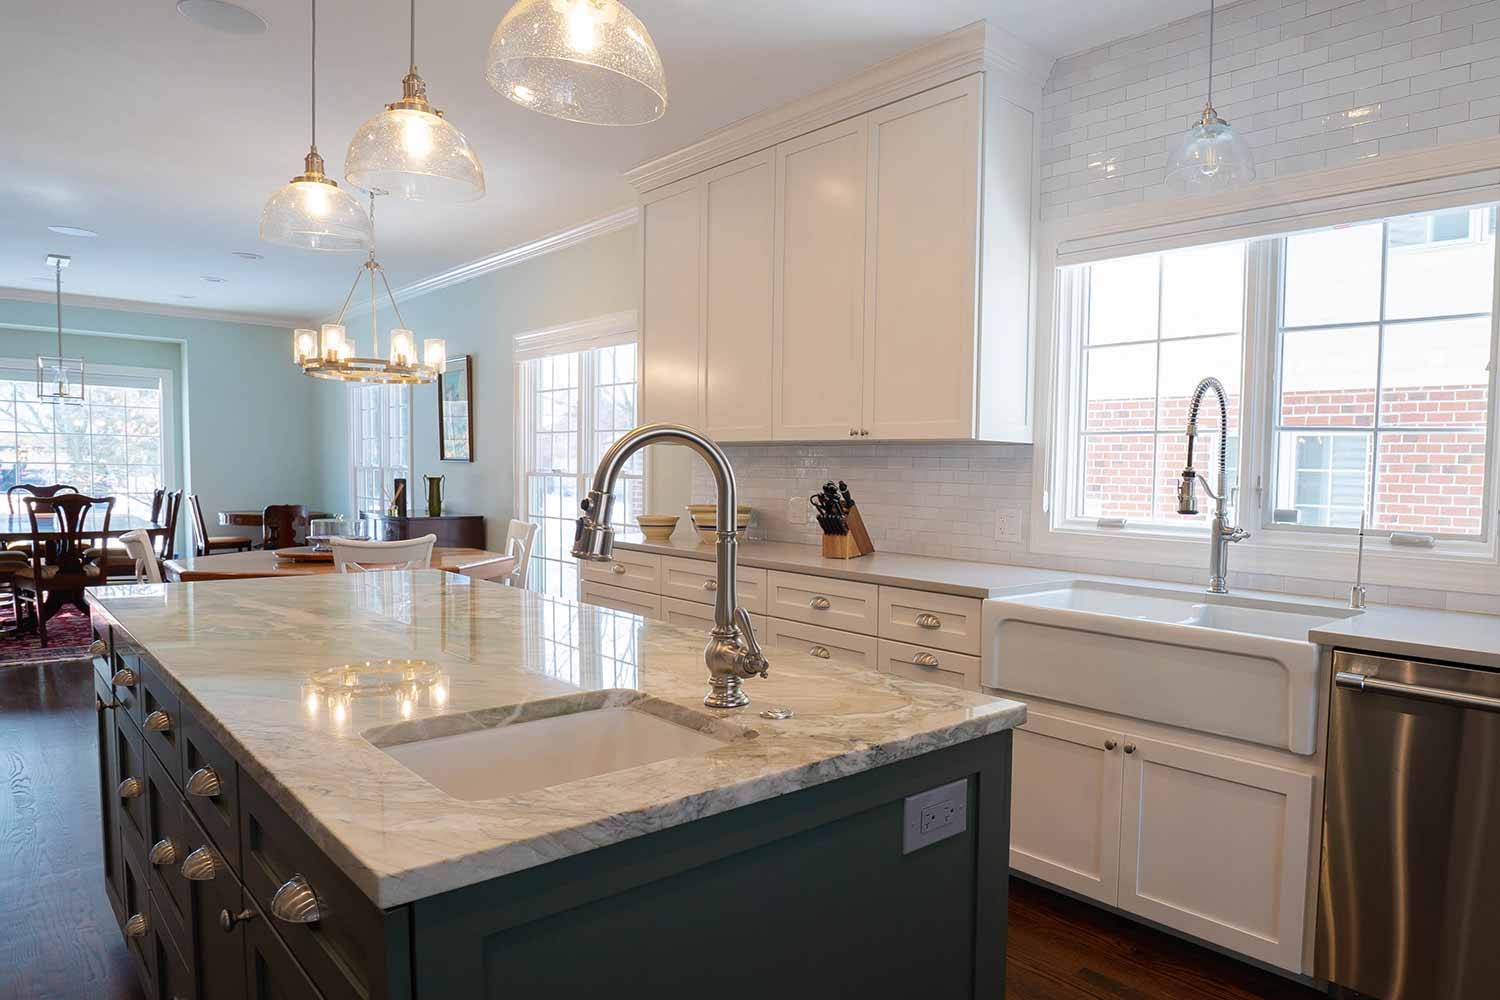 Marble countertops and white cabinets and island interior remodel.